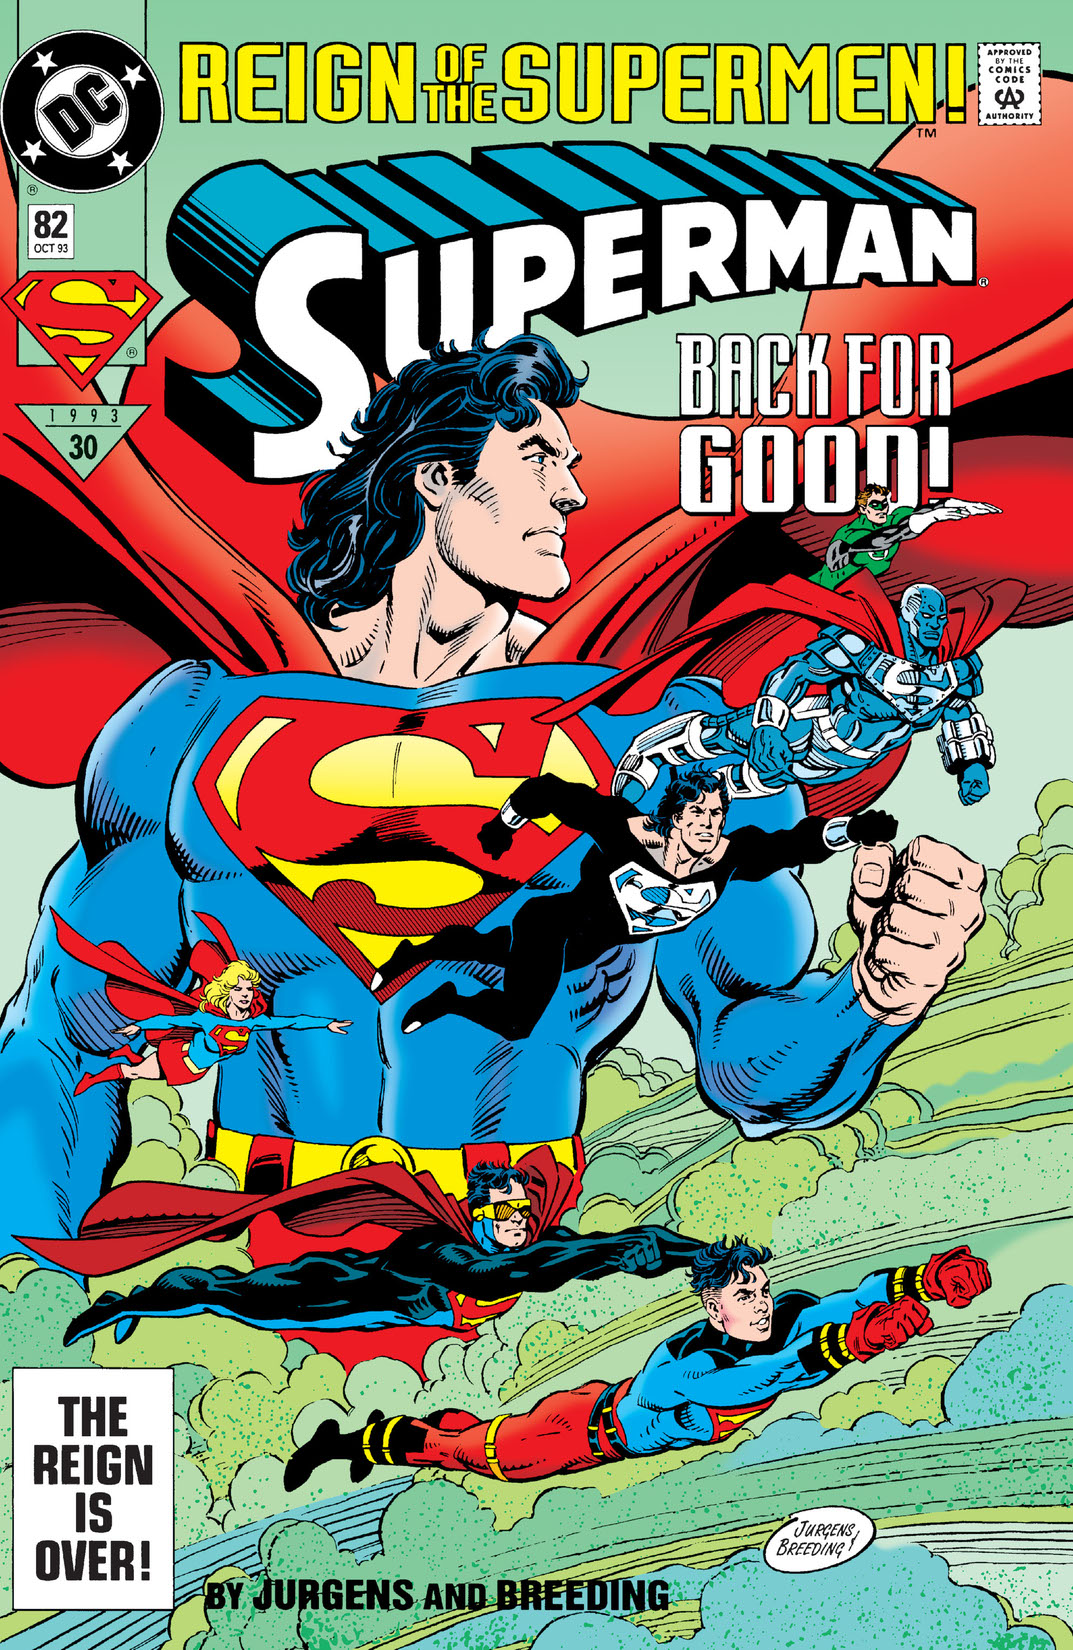 Superman (1986-) #82 preview images